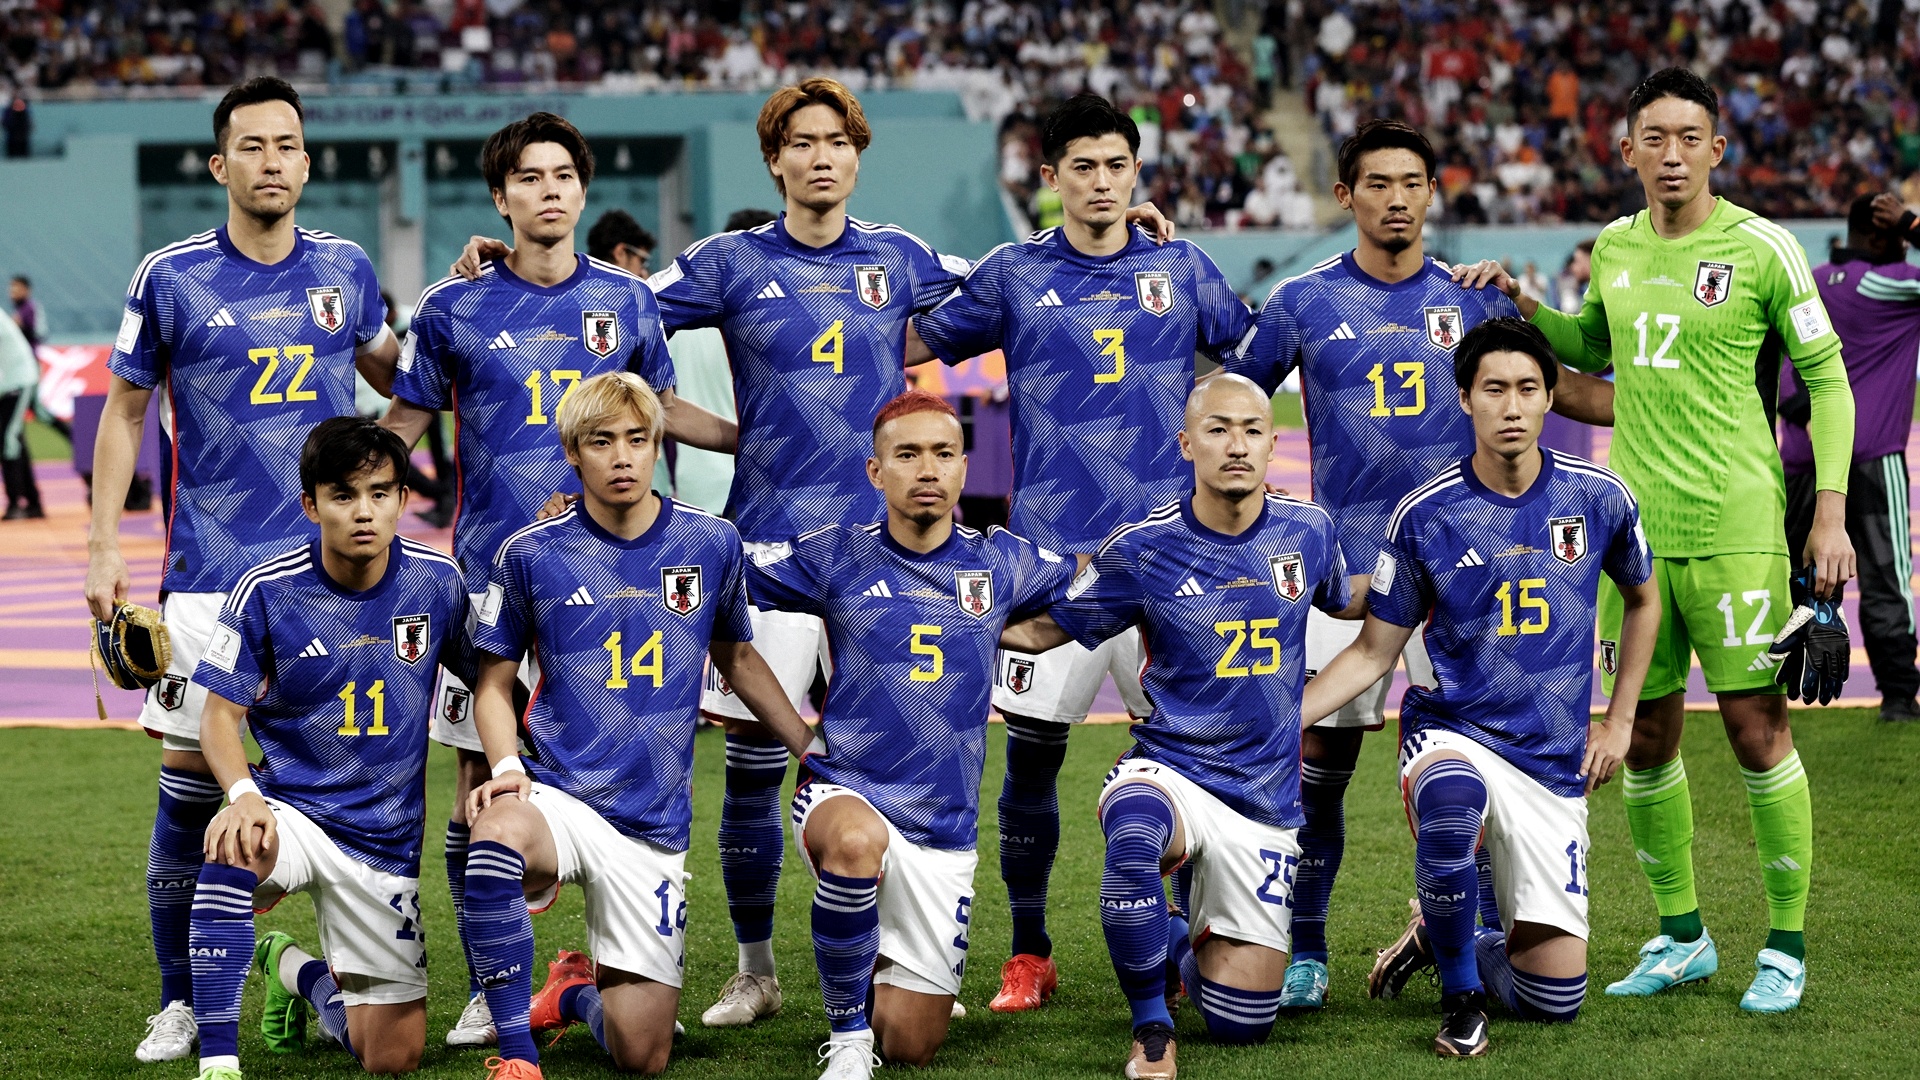 20221201_Japan_Players_World Cup vs Spain